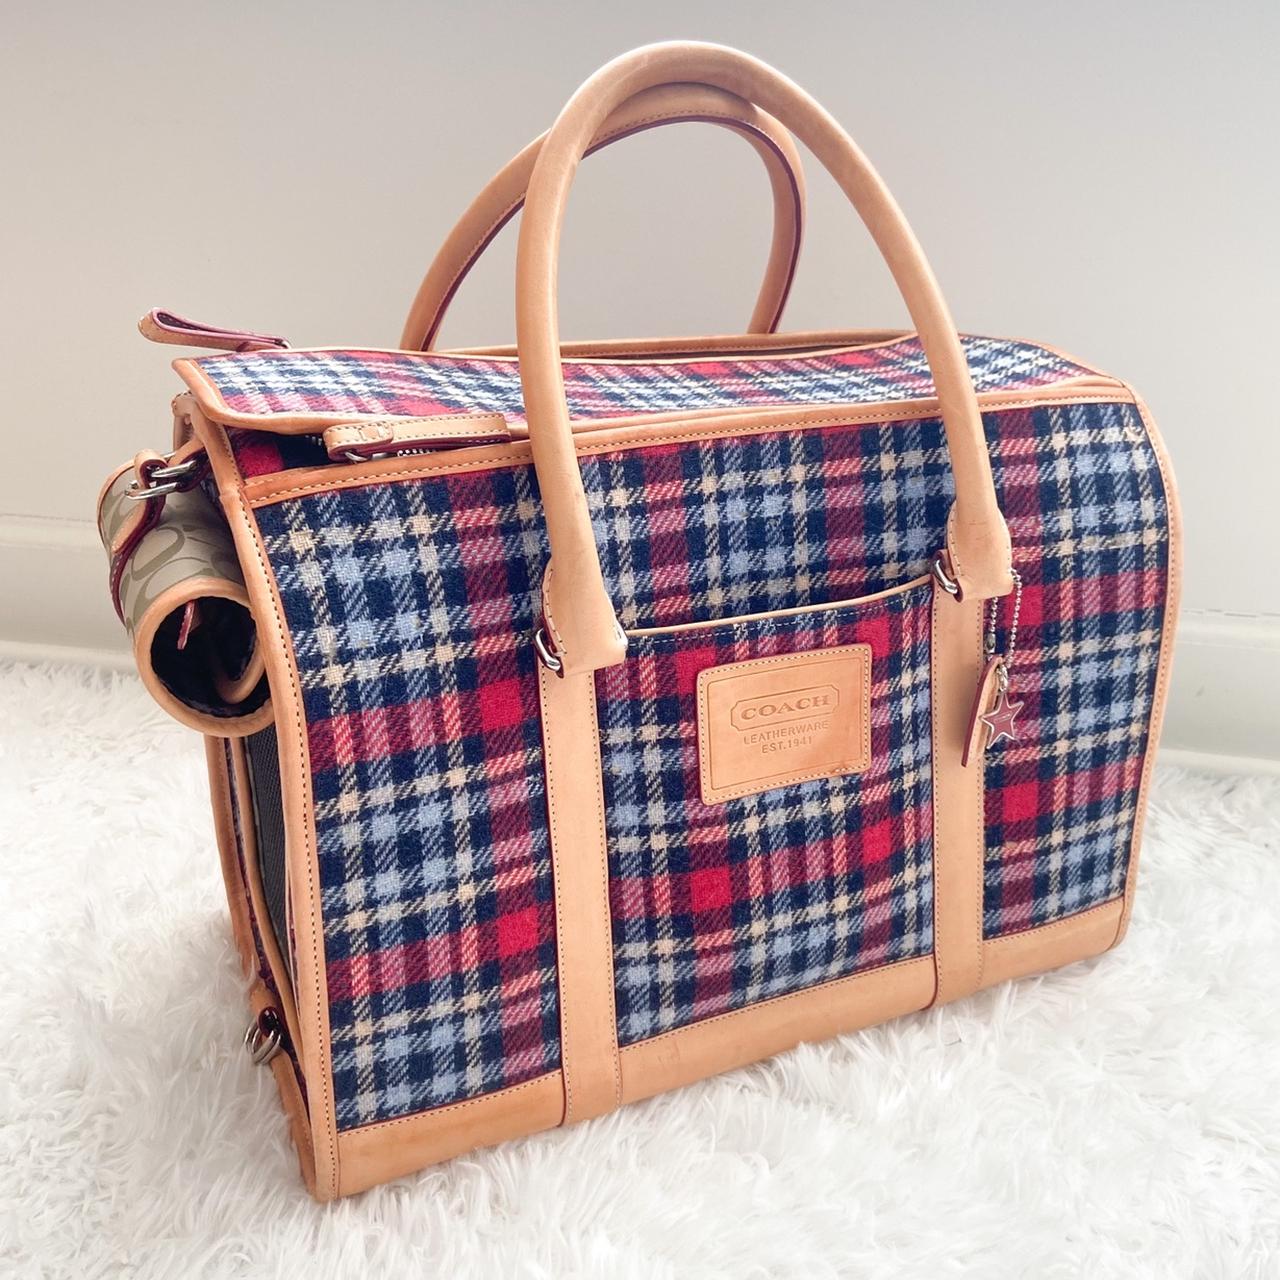 Authentic Louis Vuitton dog carrier Was used for - Depop